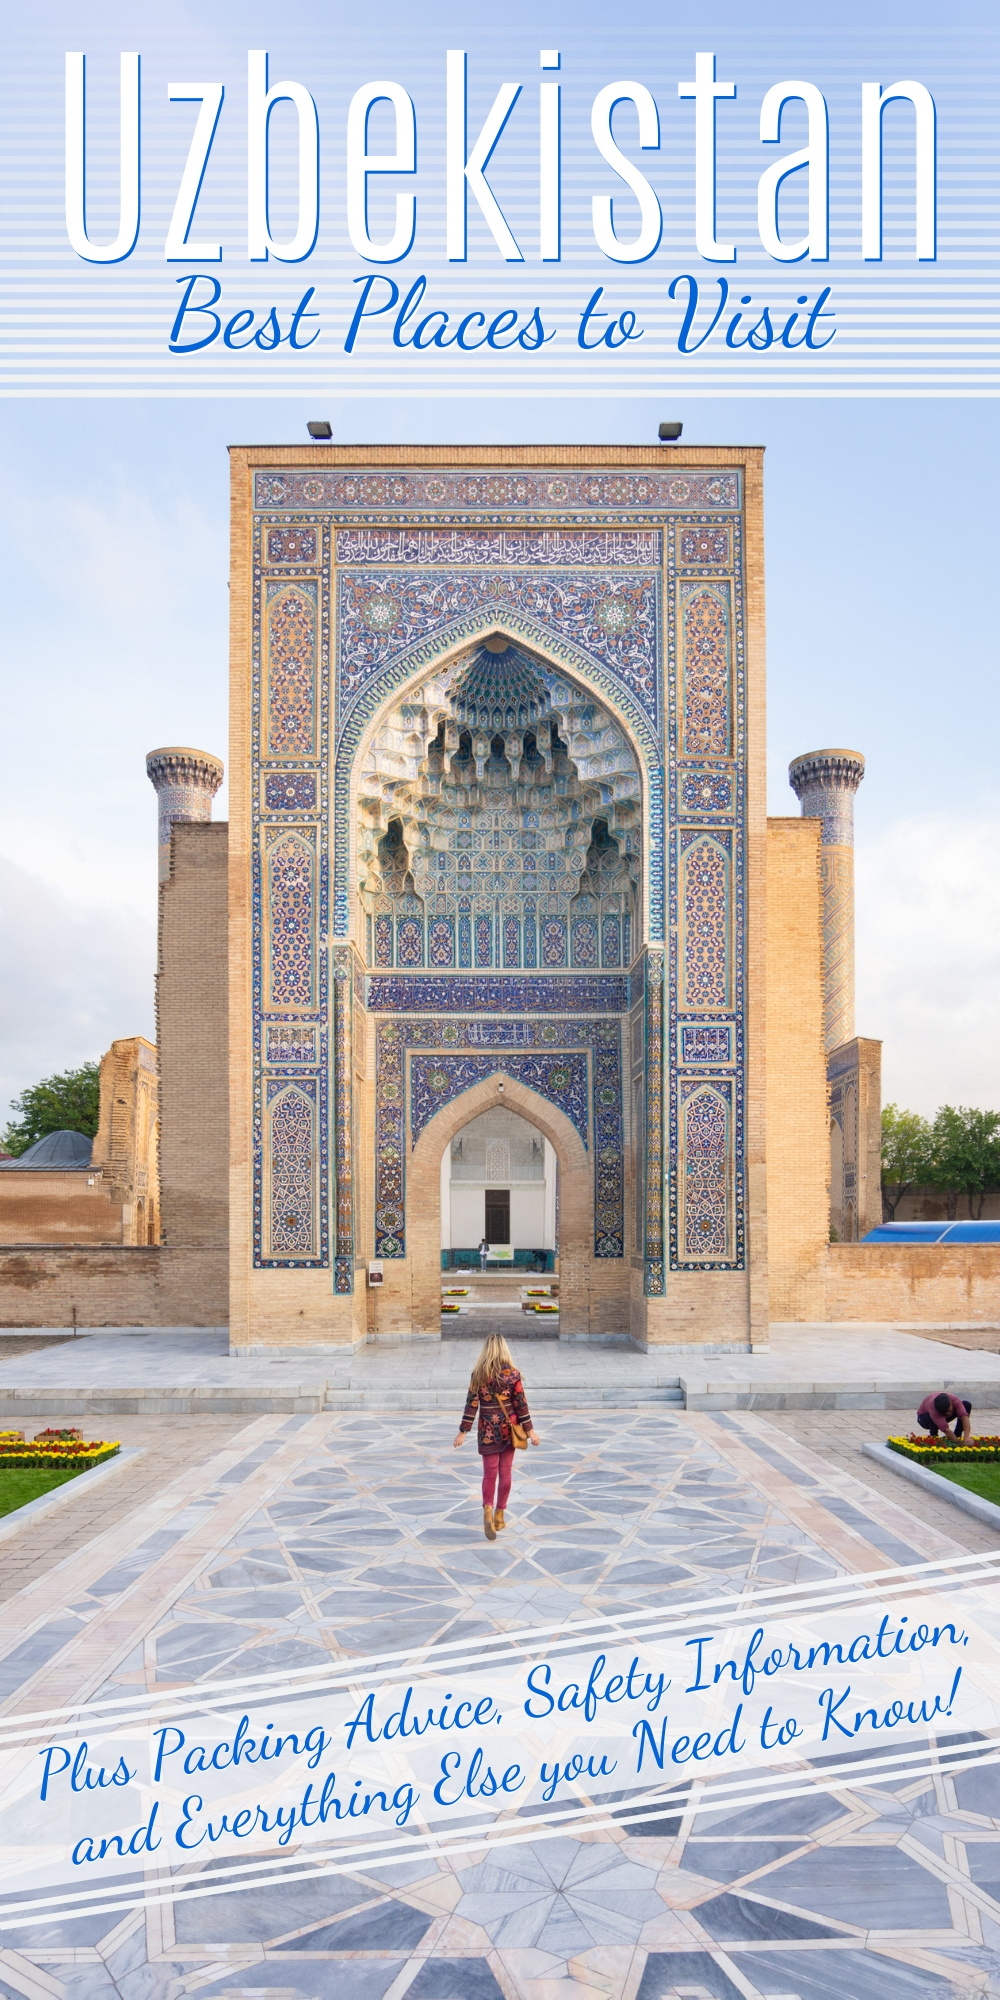 Best Places to Visit and Things to See in Uzbekistan on Pinterest